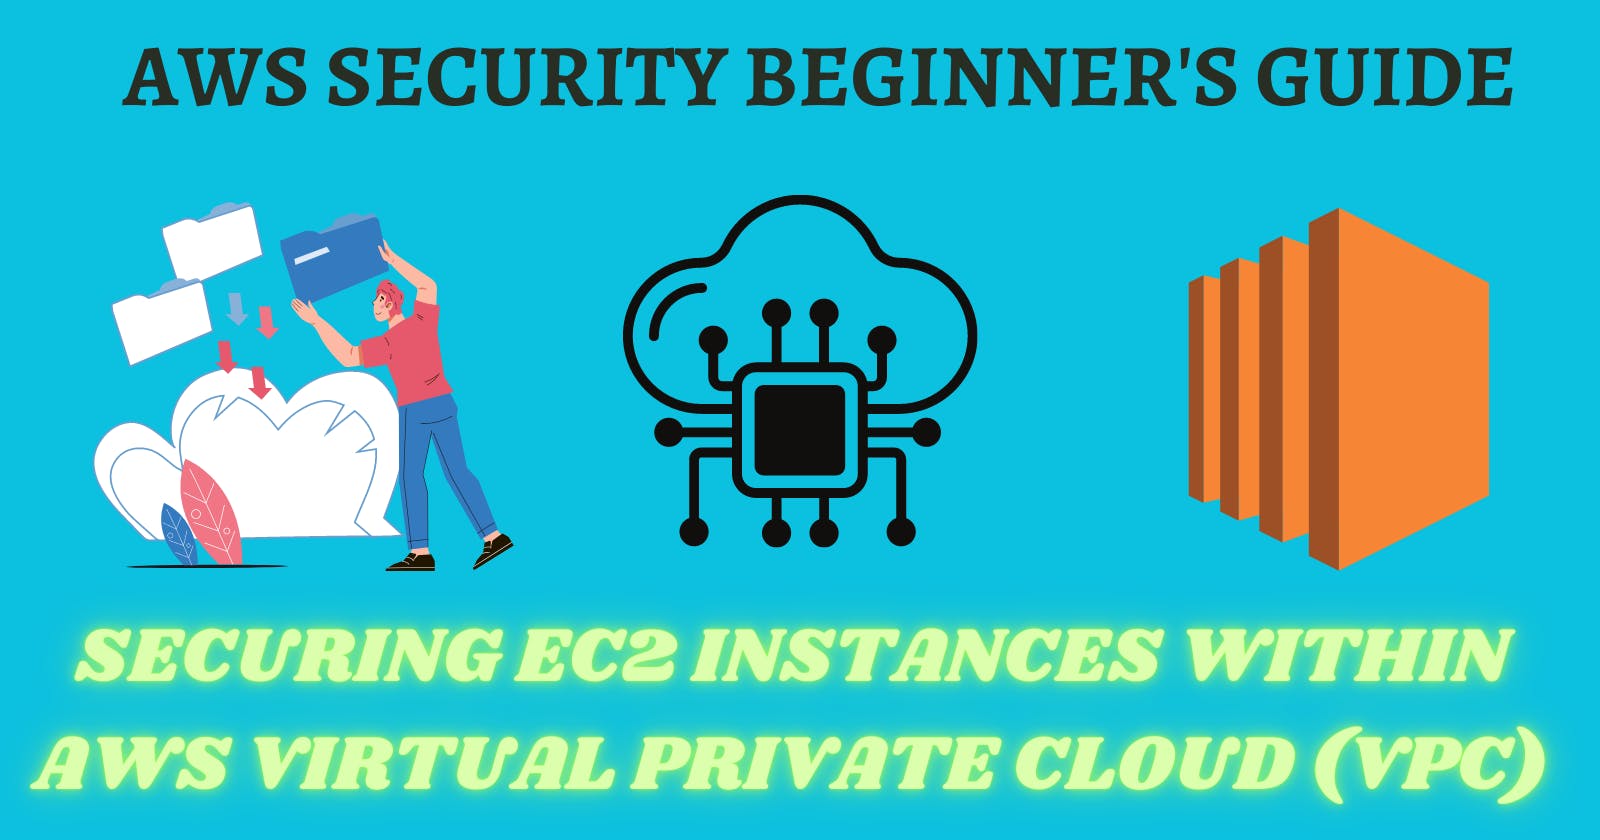 Securing EC2 Instances within AWS Virtual Private Cloud (VPC)